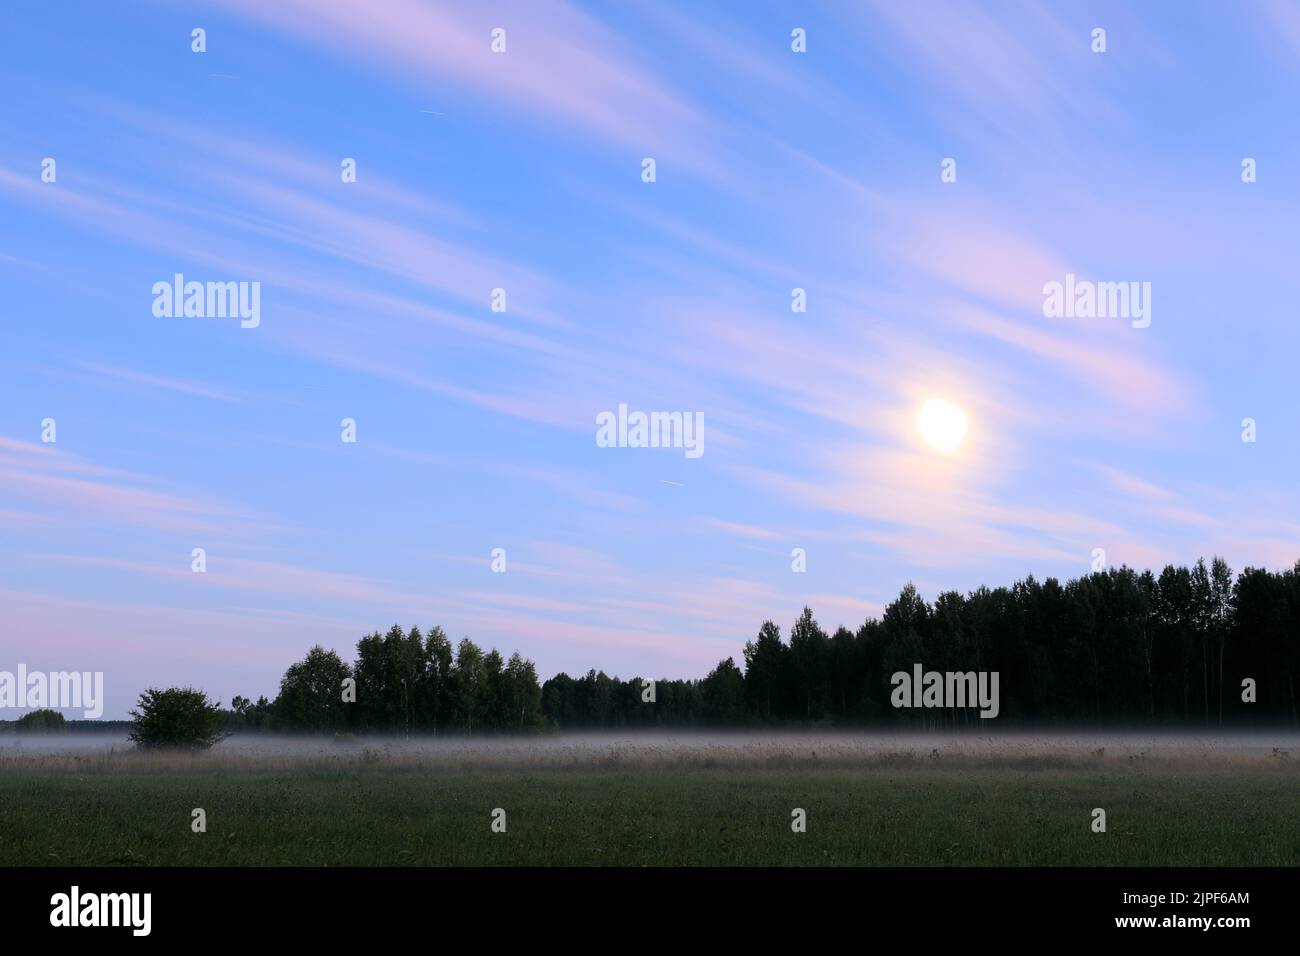 Rural landscape by night. Moon above wood and field with evening fog, magical atmospheric mood. Long exposure shot. Stock Photo